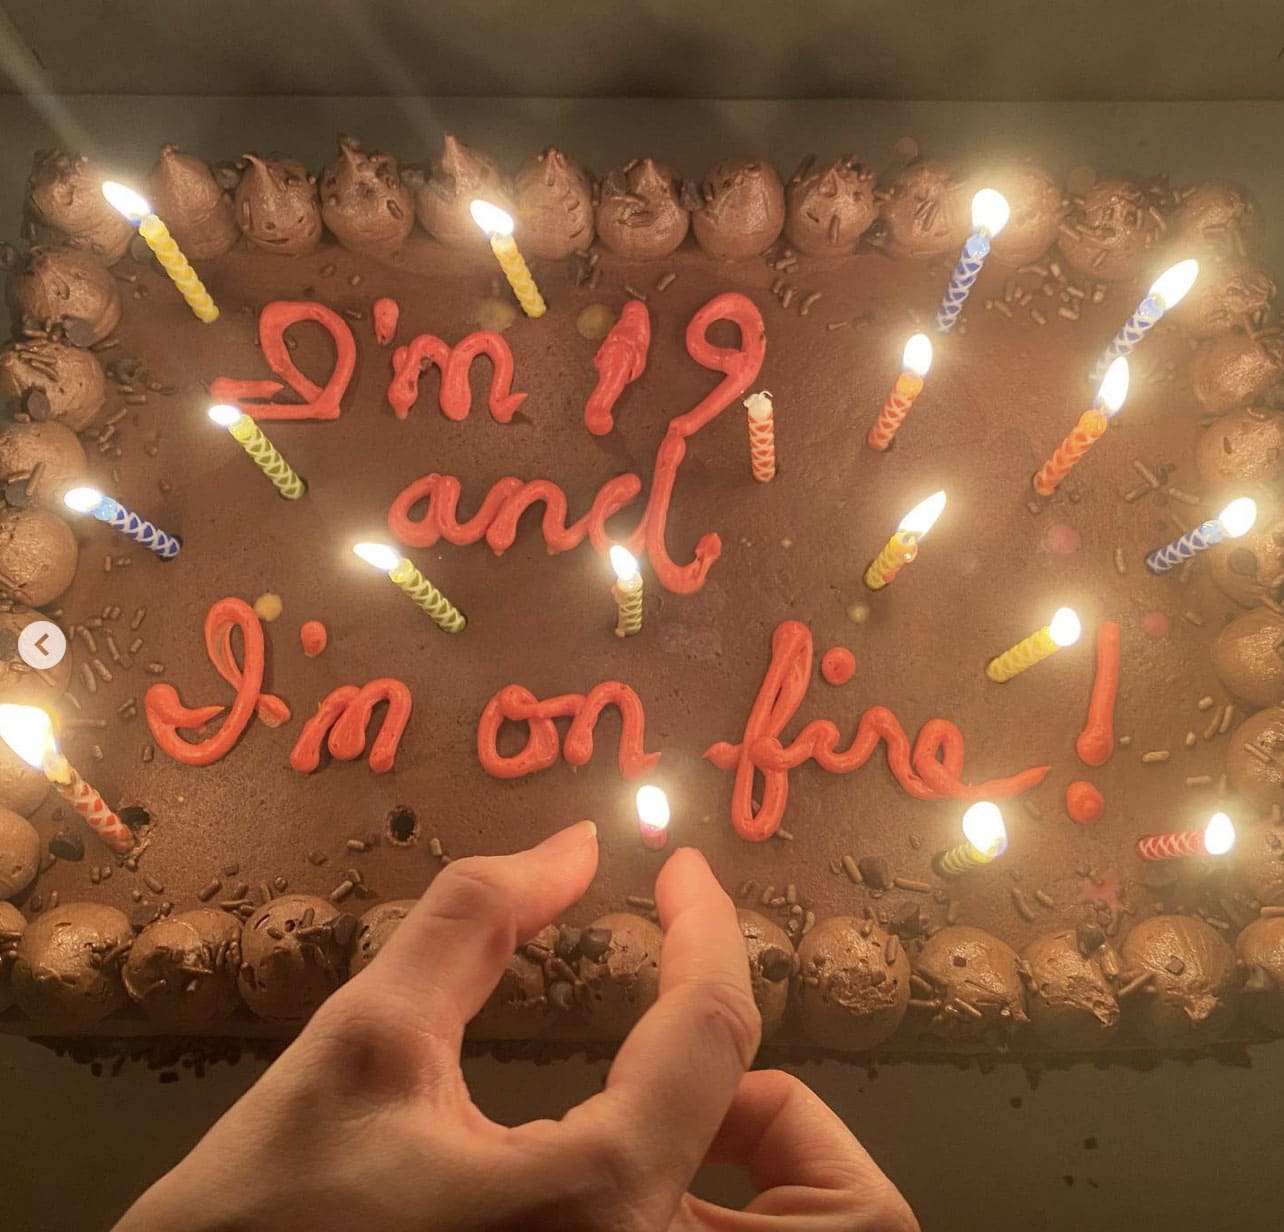 Olivia Rodrigo's 19th birthday cake was designed with a lyric from Lorde's Perfect Places song